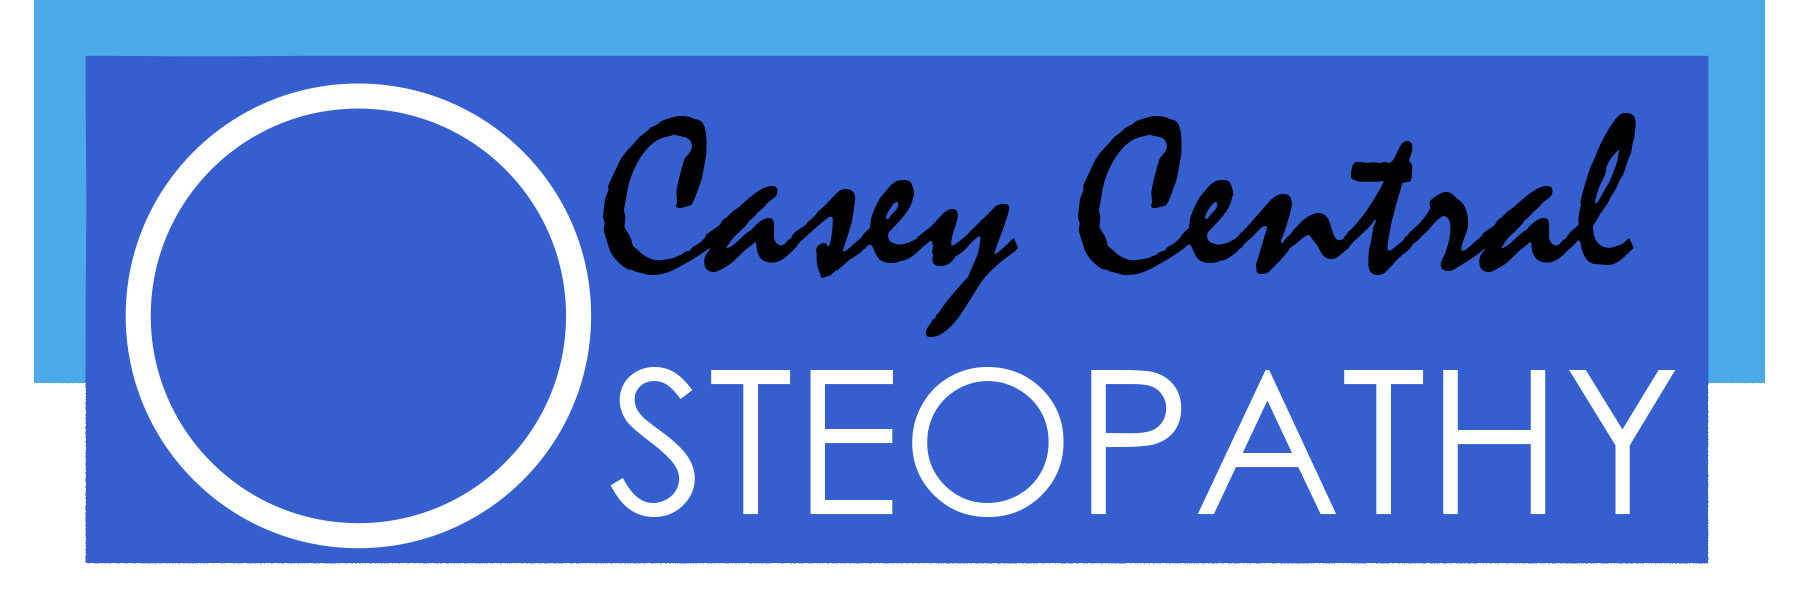 Casey Central Osteopathy